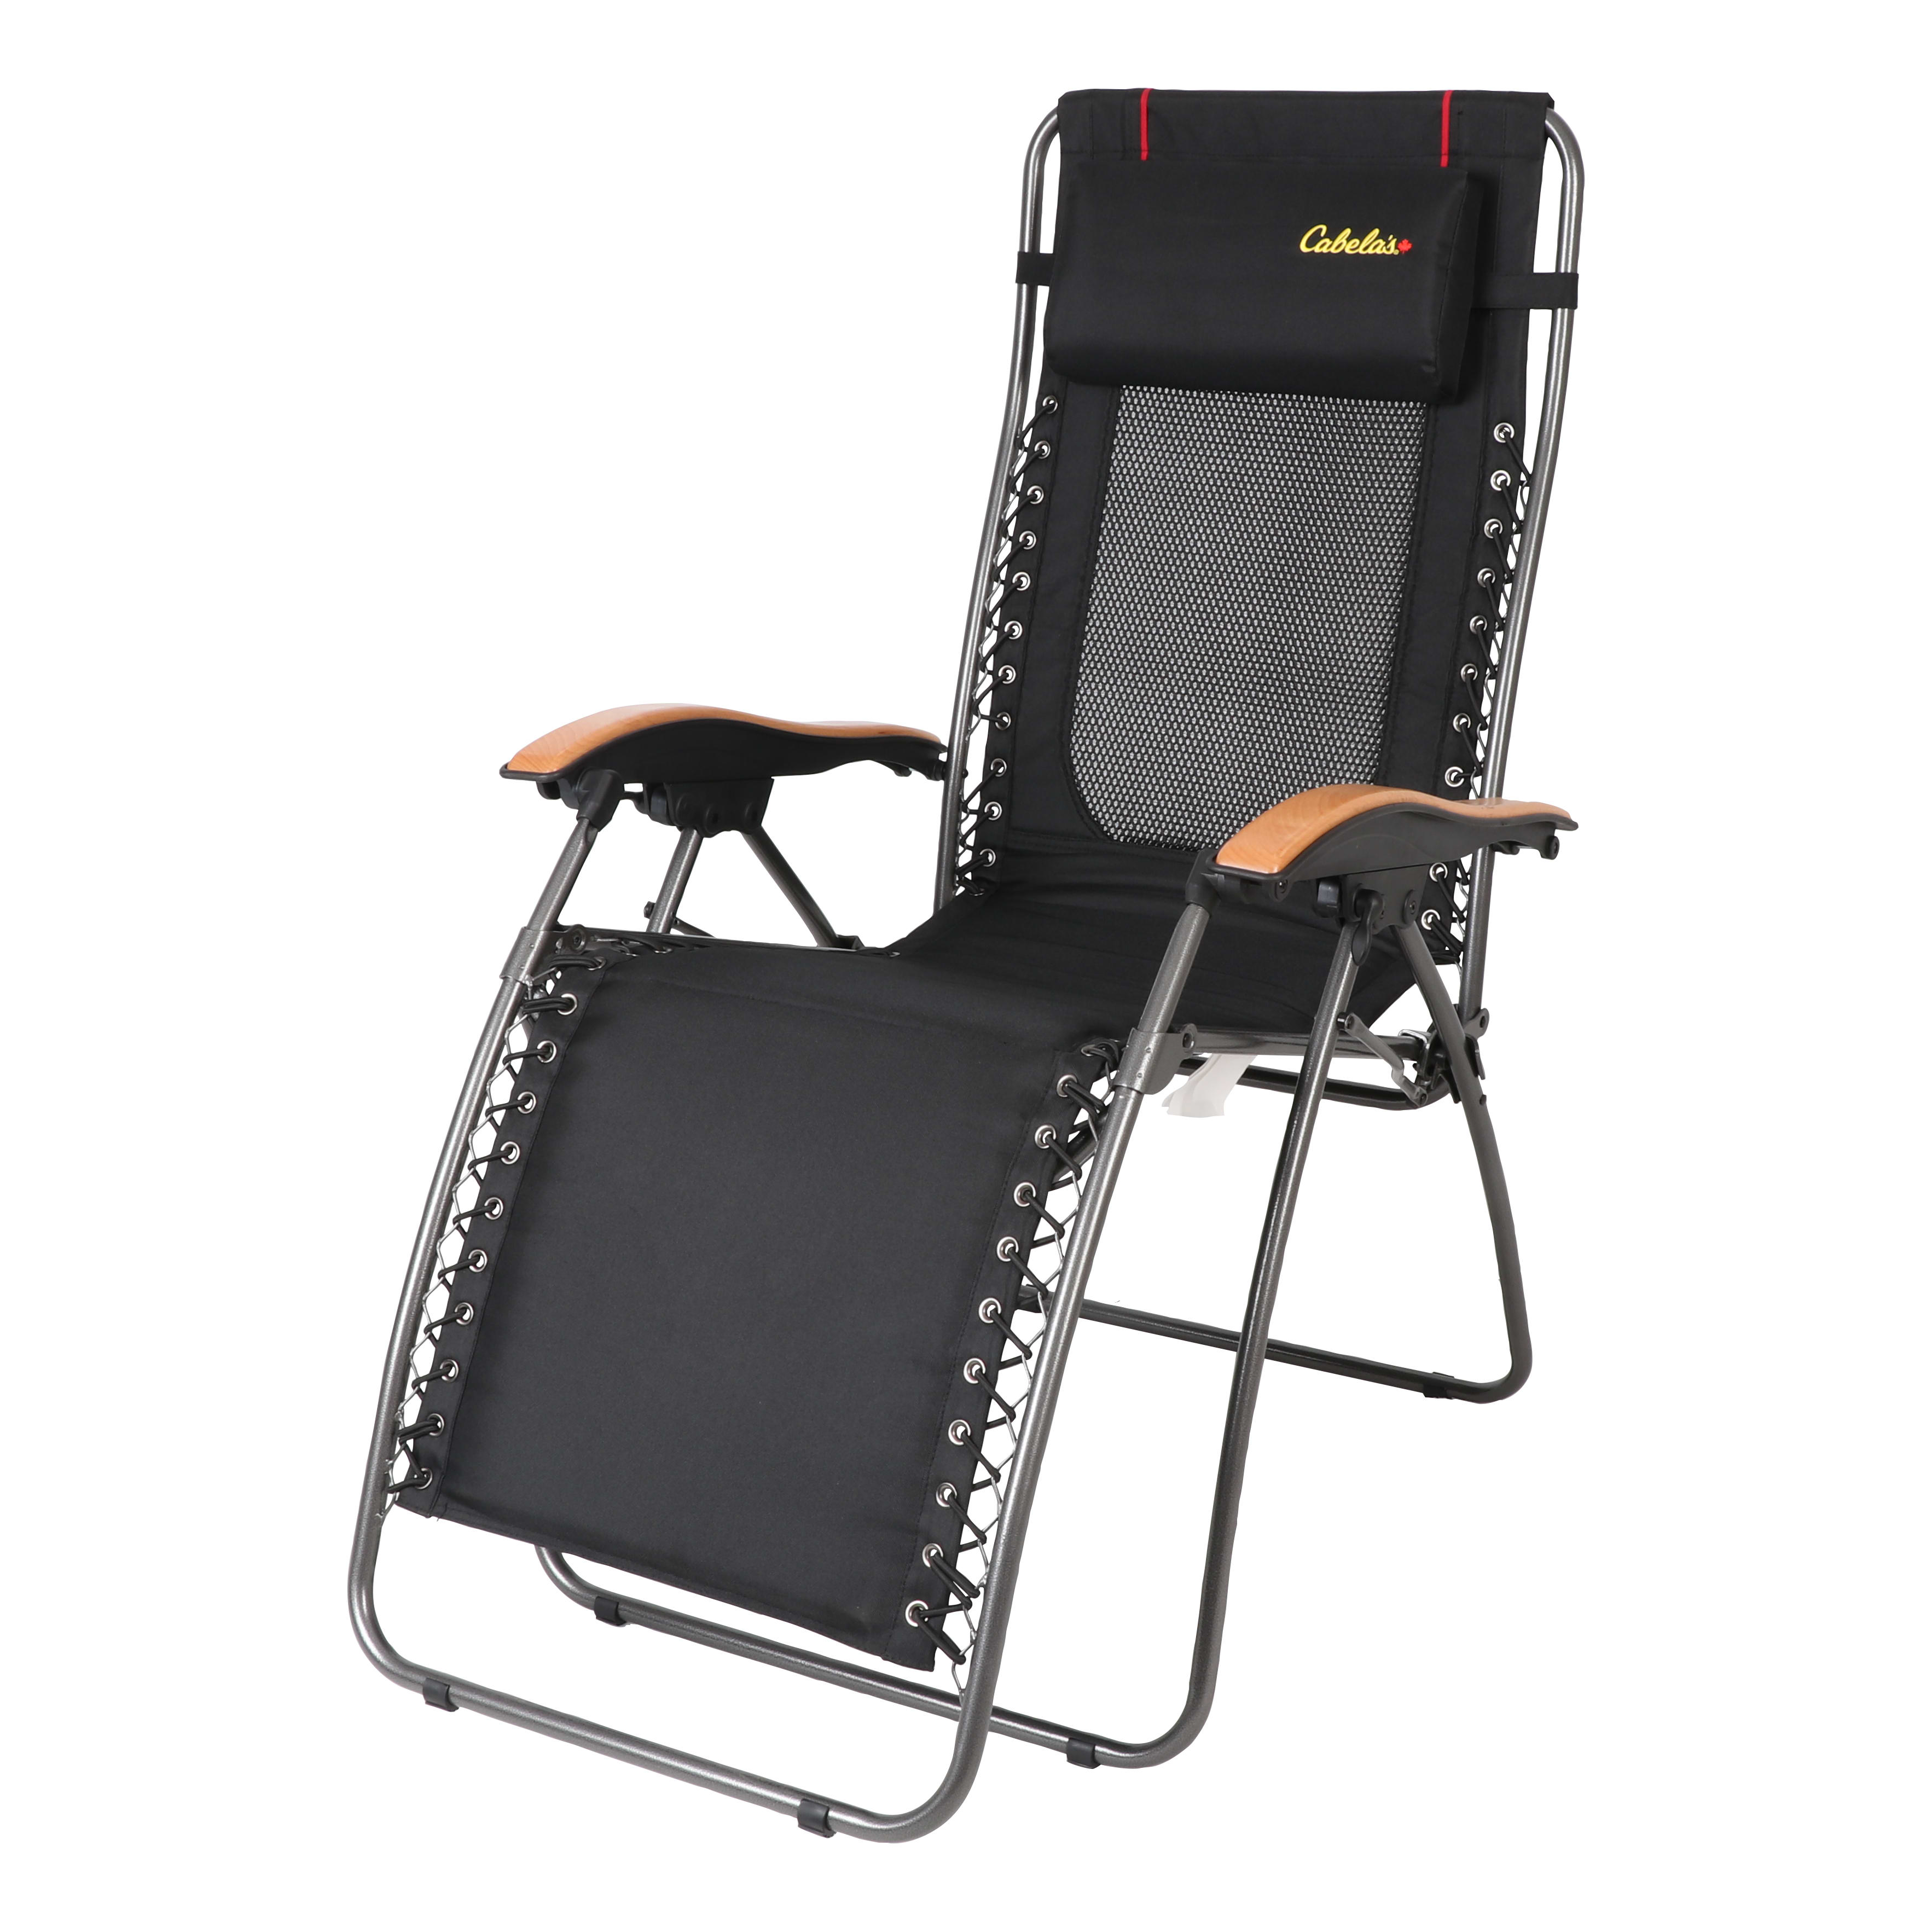 Cabela's Padded Lounger Chair